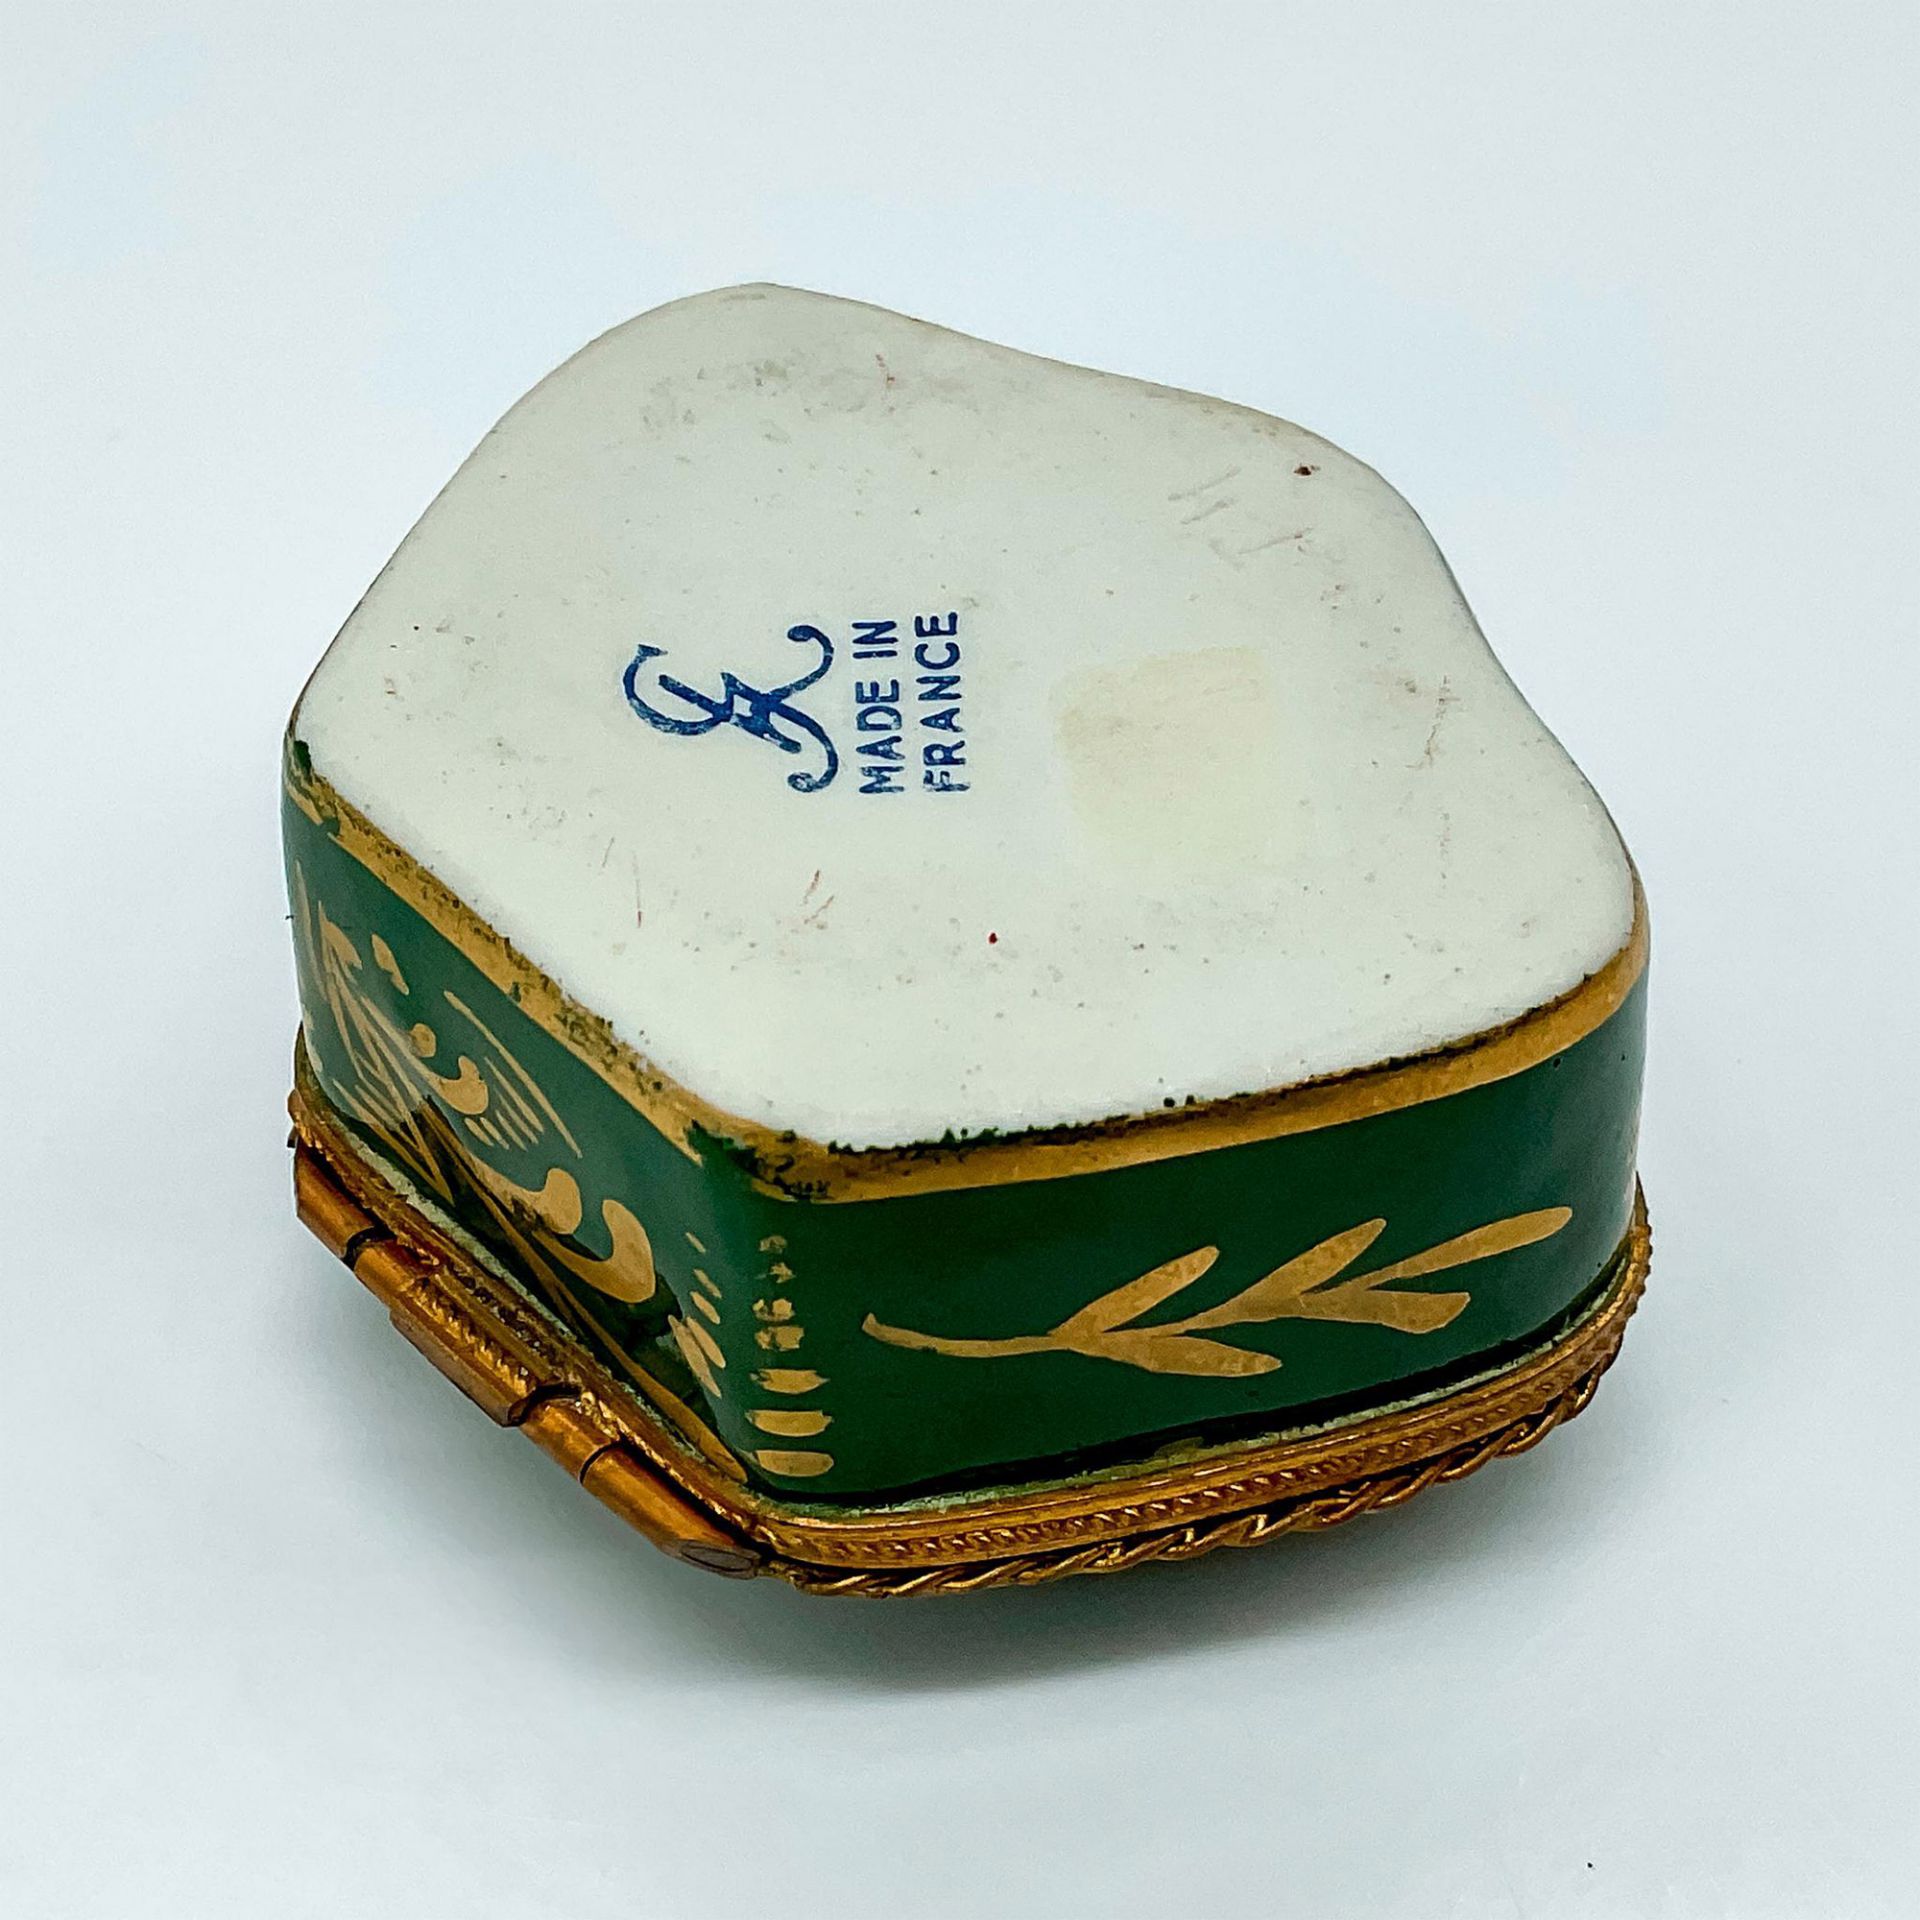 Vintage Limoges Hand Painted Green and Gold Box - Image 3 of 3